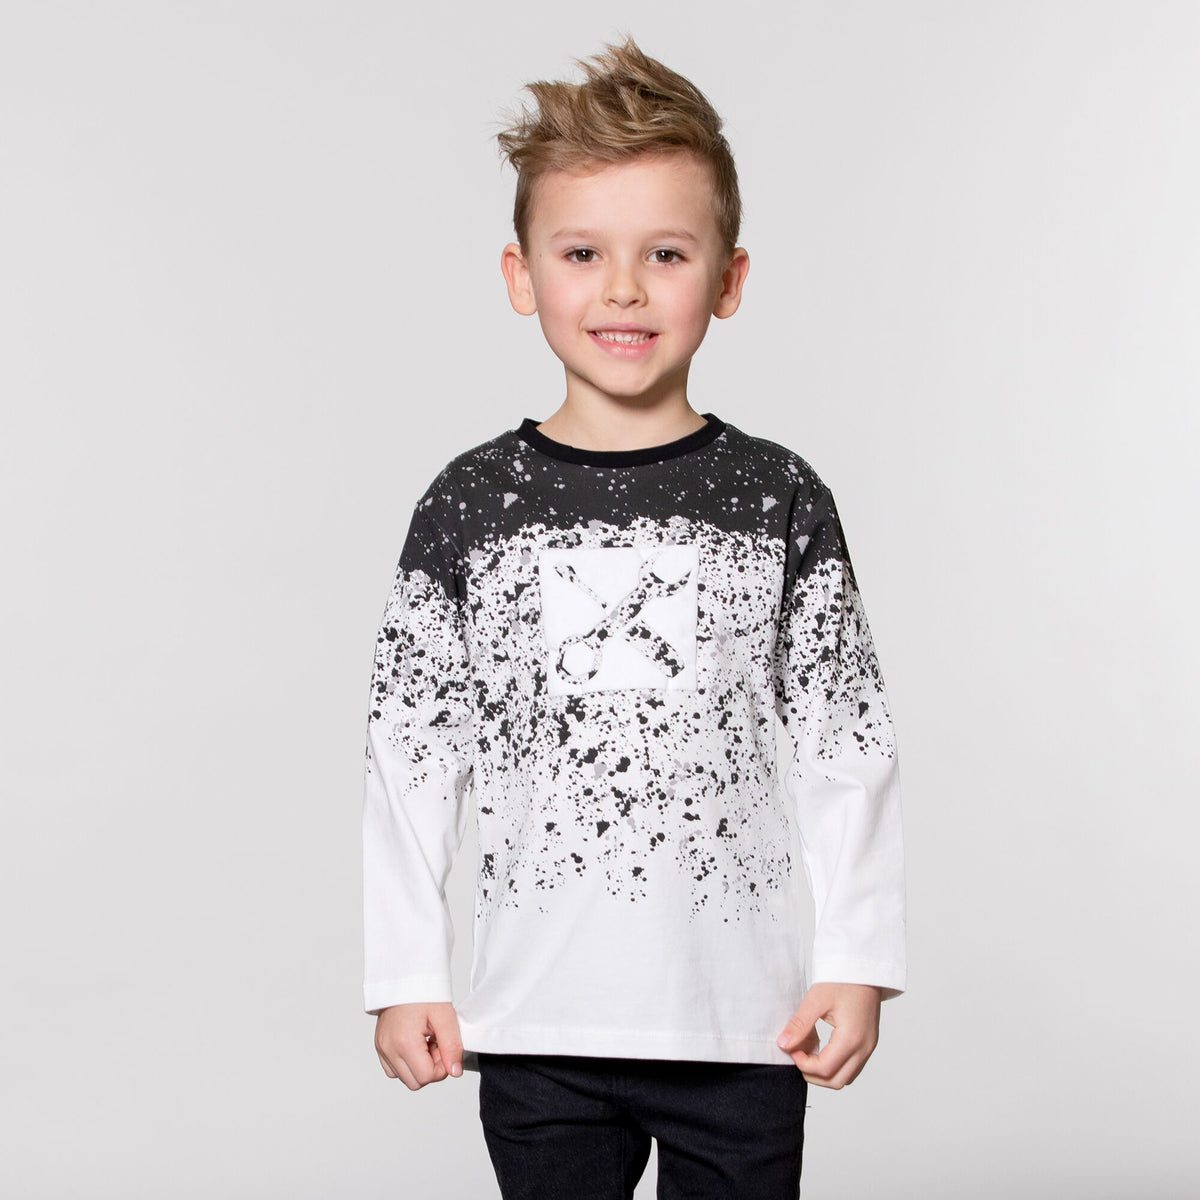 Boys Long Sleeve Black and White Top